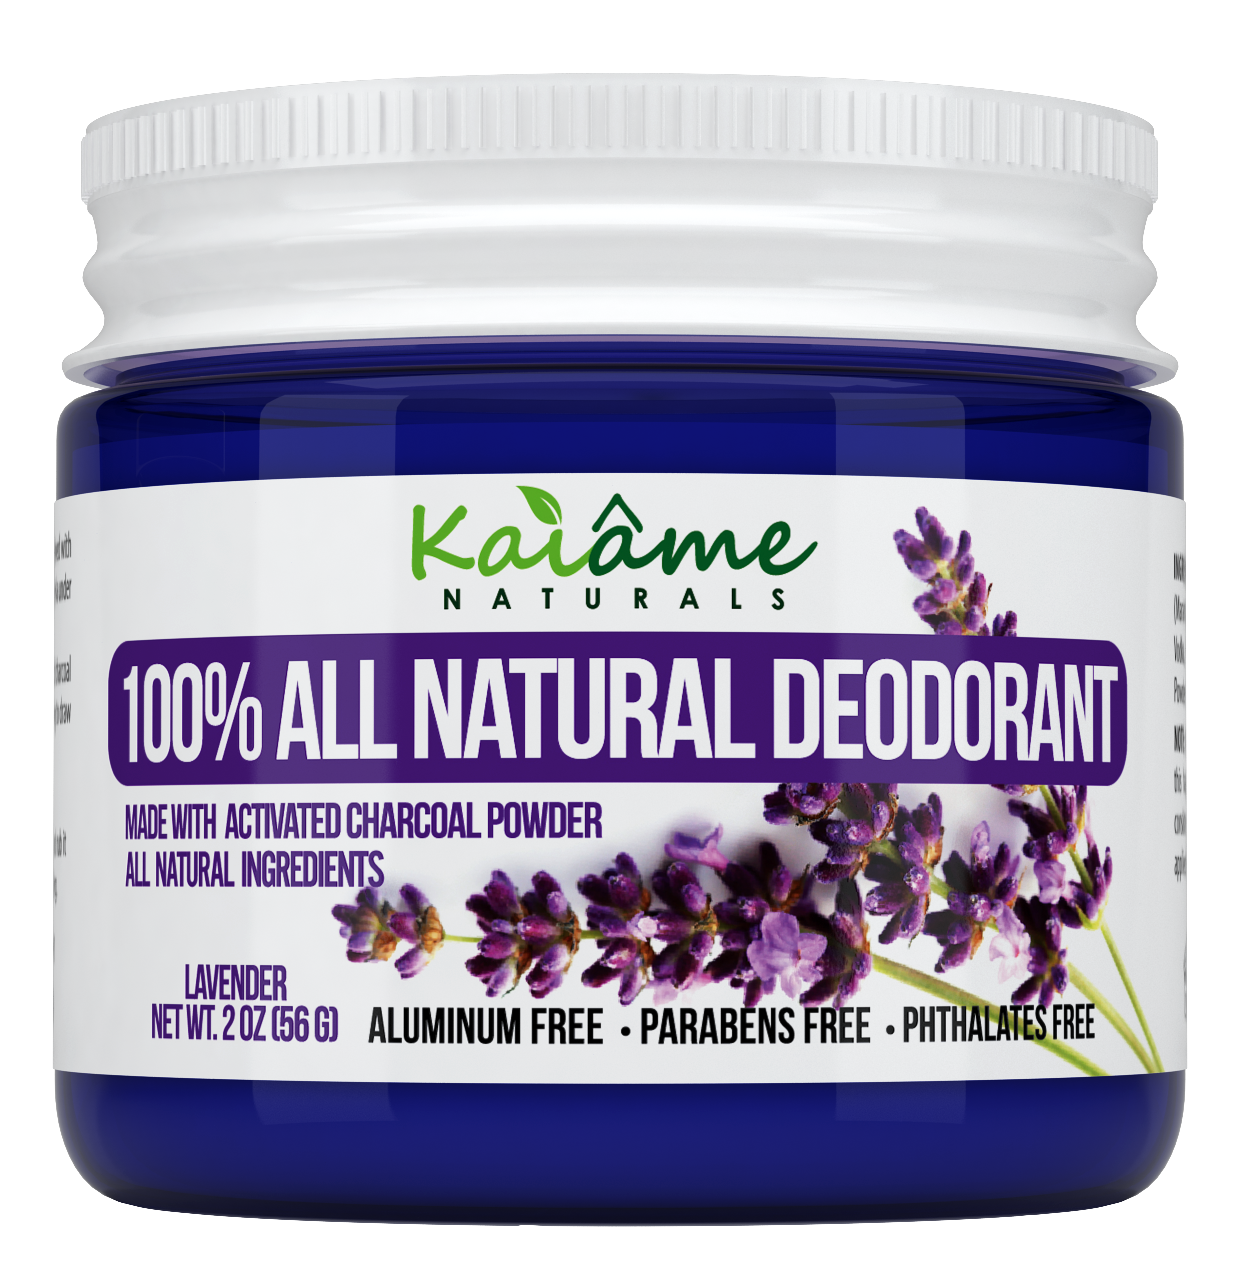 Kaiame Naturals Natural Deodorant (Lavendar) with Activated Charcoal Powder, All Natural and Organic Ingredients, No Aluminum, Parabens, or Phthalates Lavender